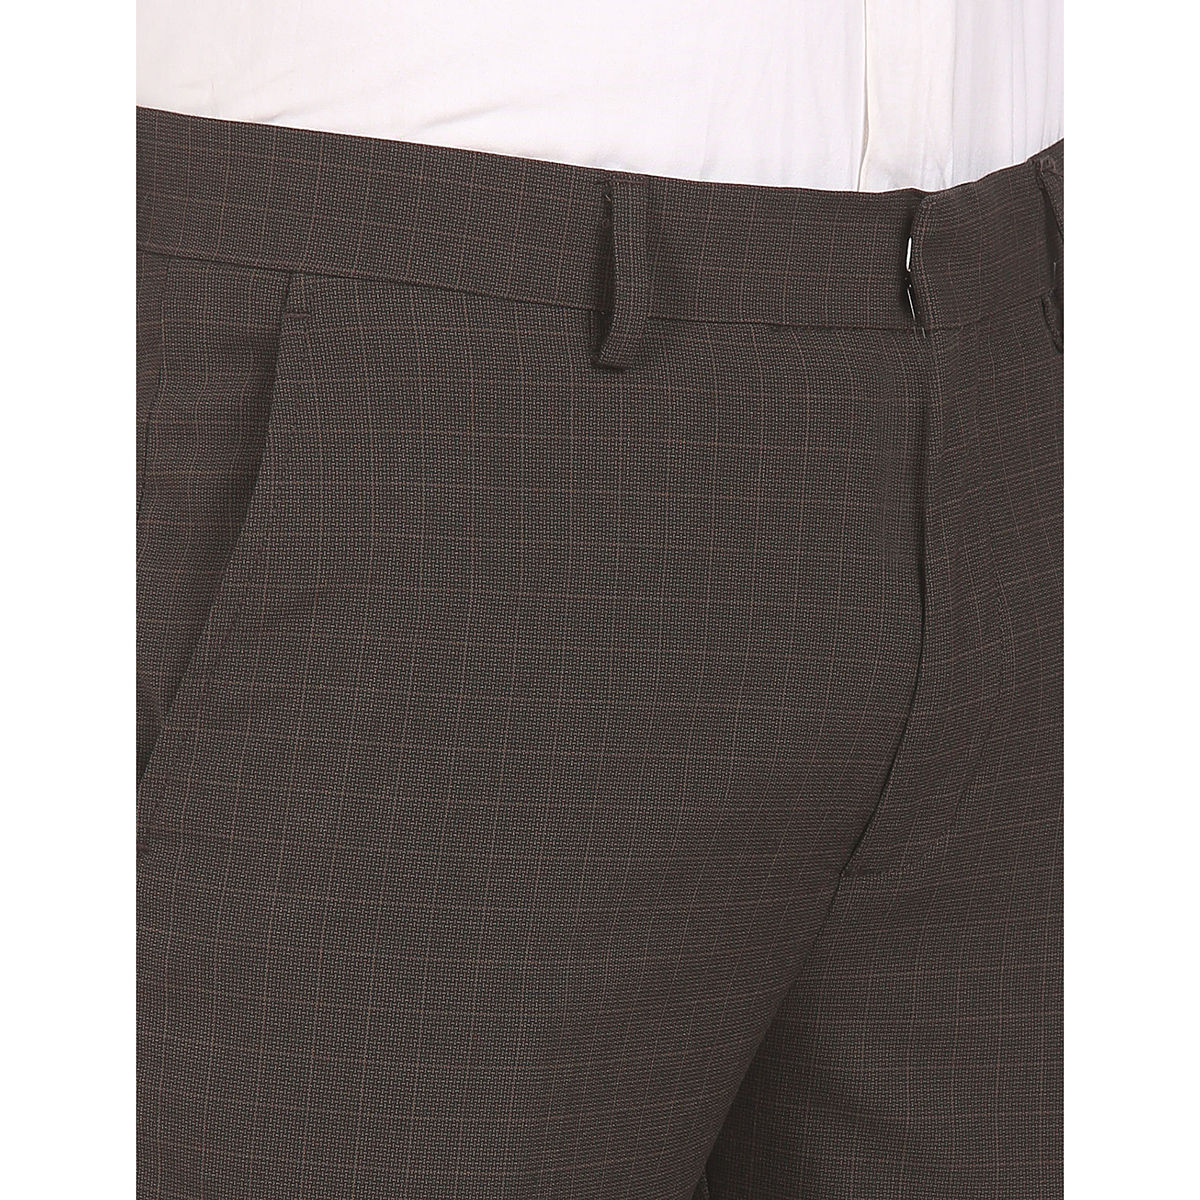 Checkered Trousers - Buy Checkered Trousers Online at Best Prices In India  | Flipkart.com